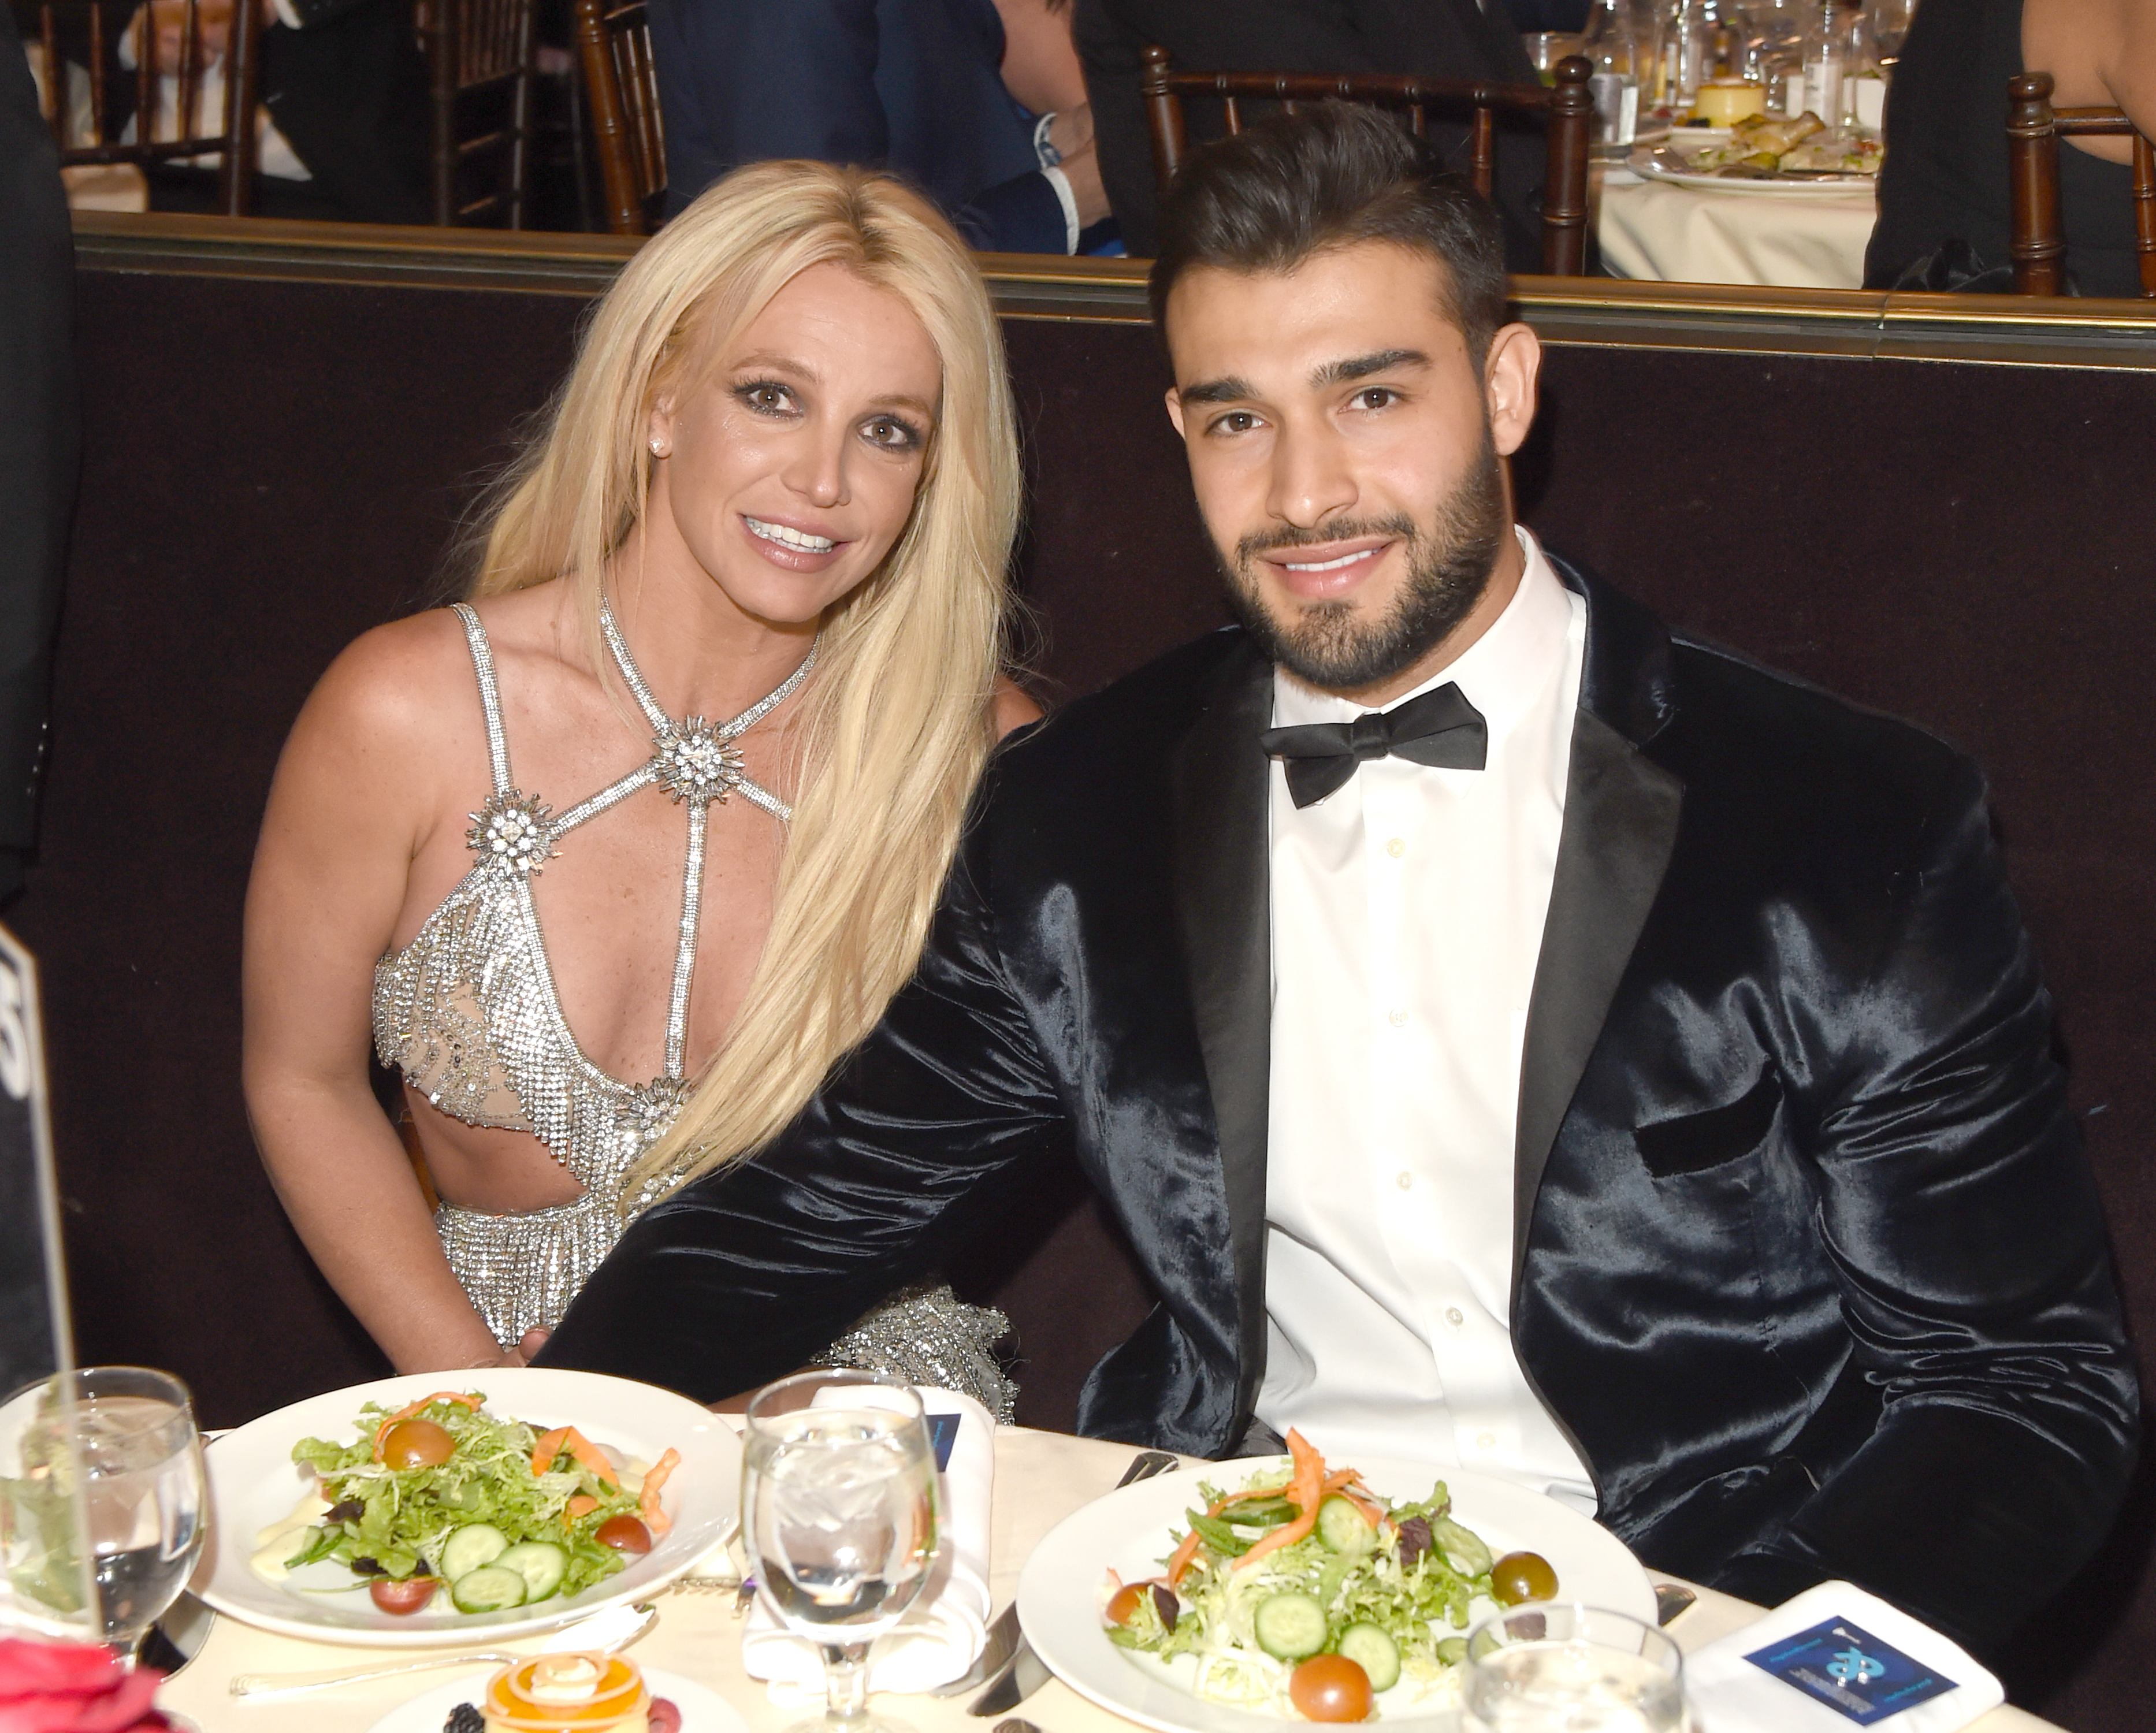 Britney Spears says she suffered miscarriage of unexpected ‘miracle baby’